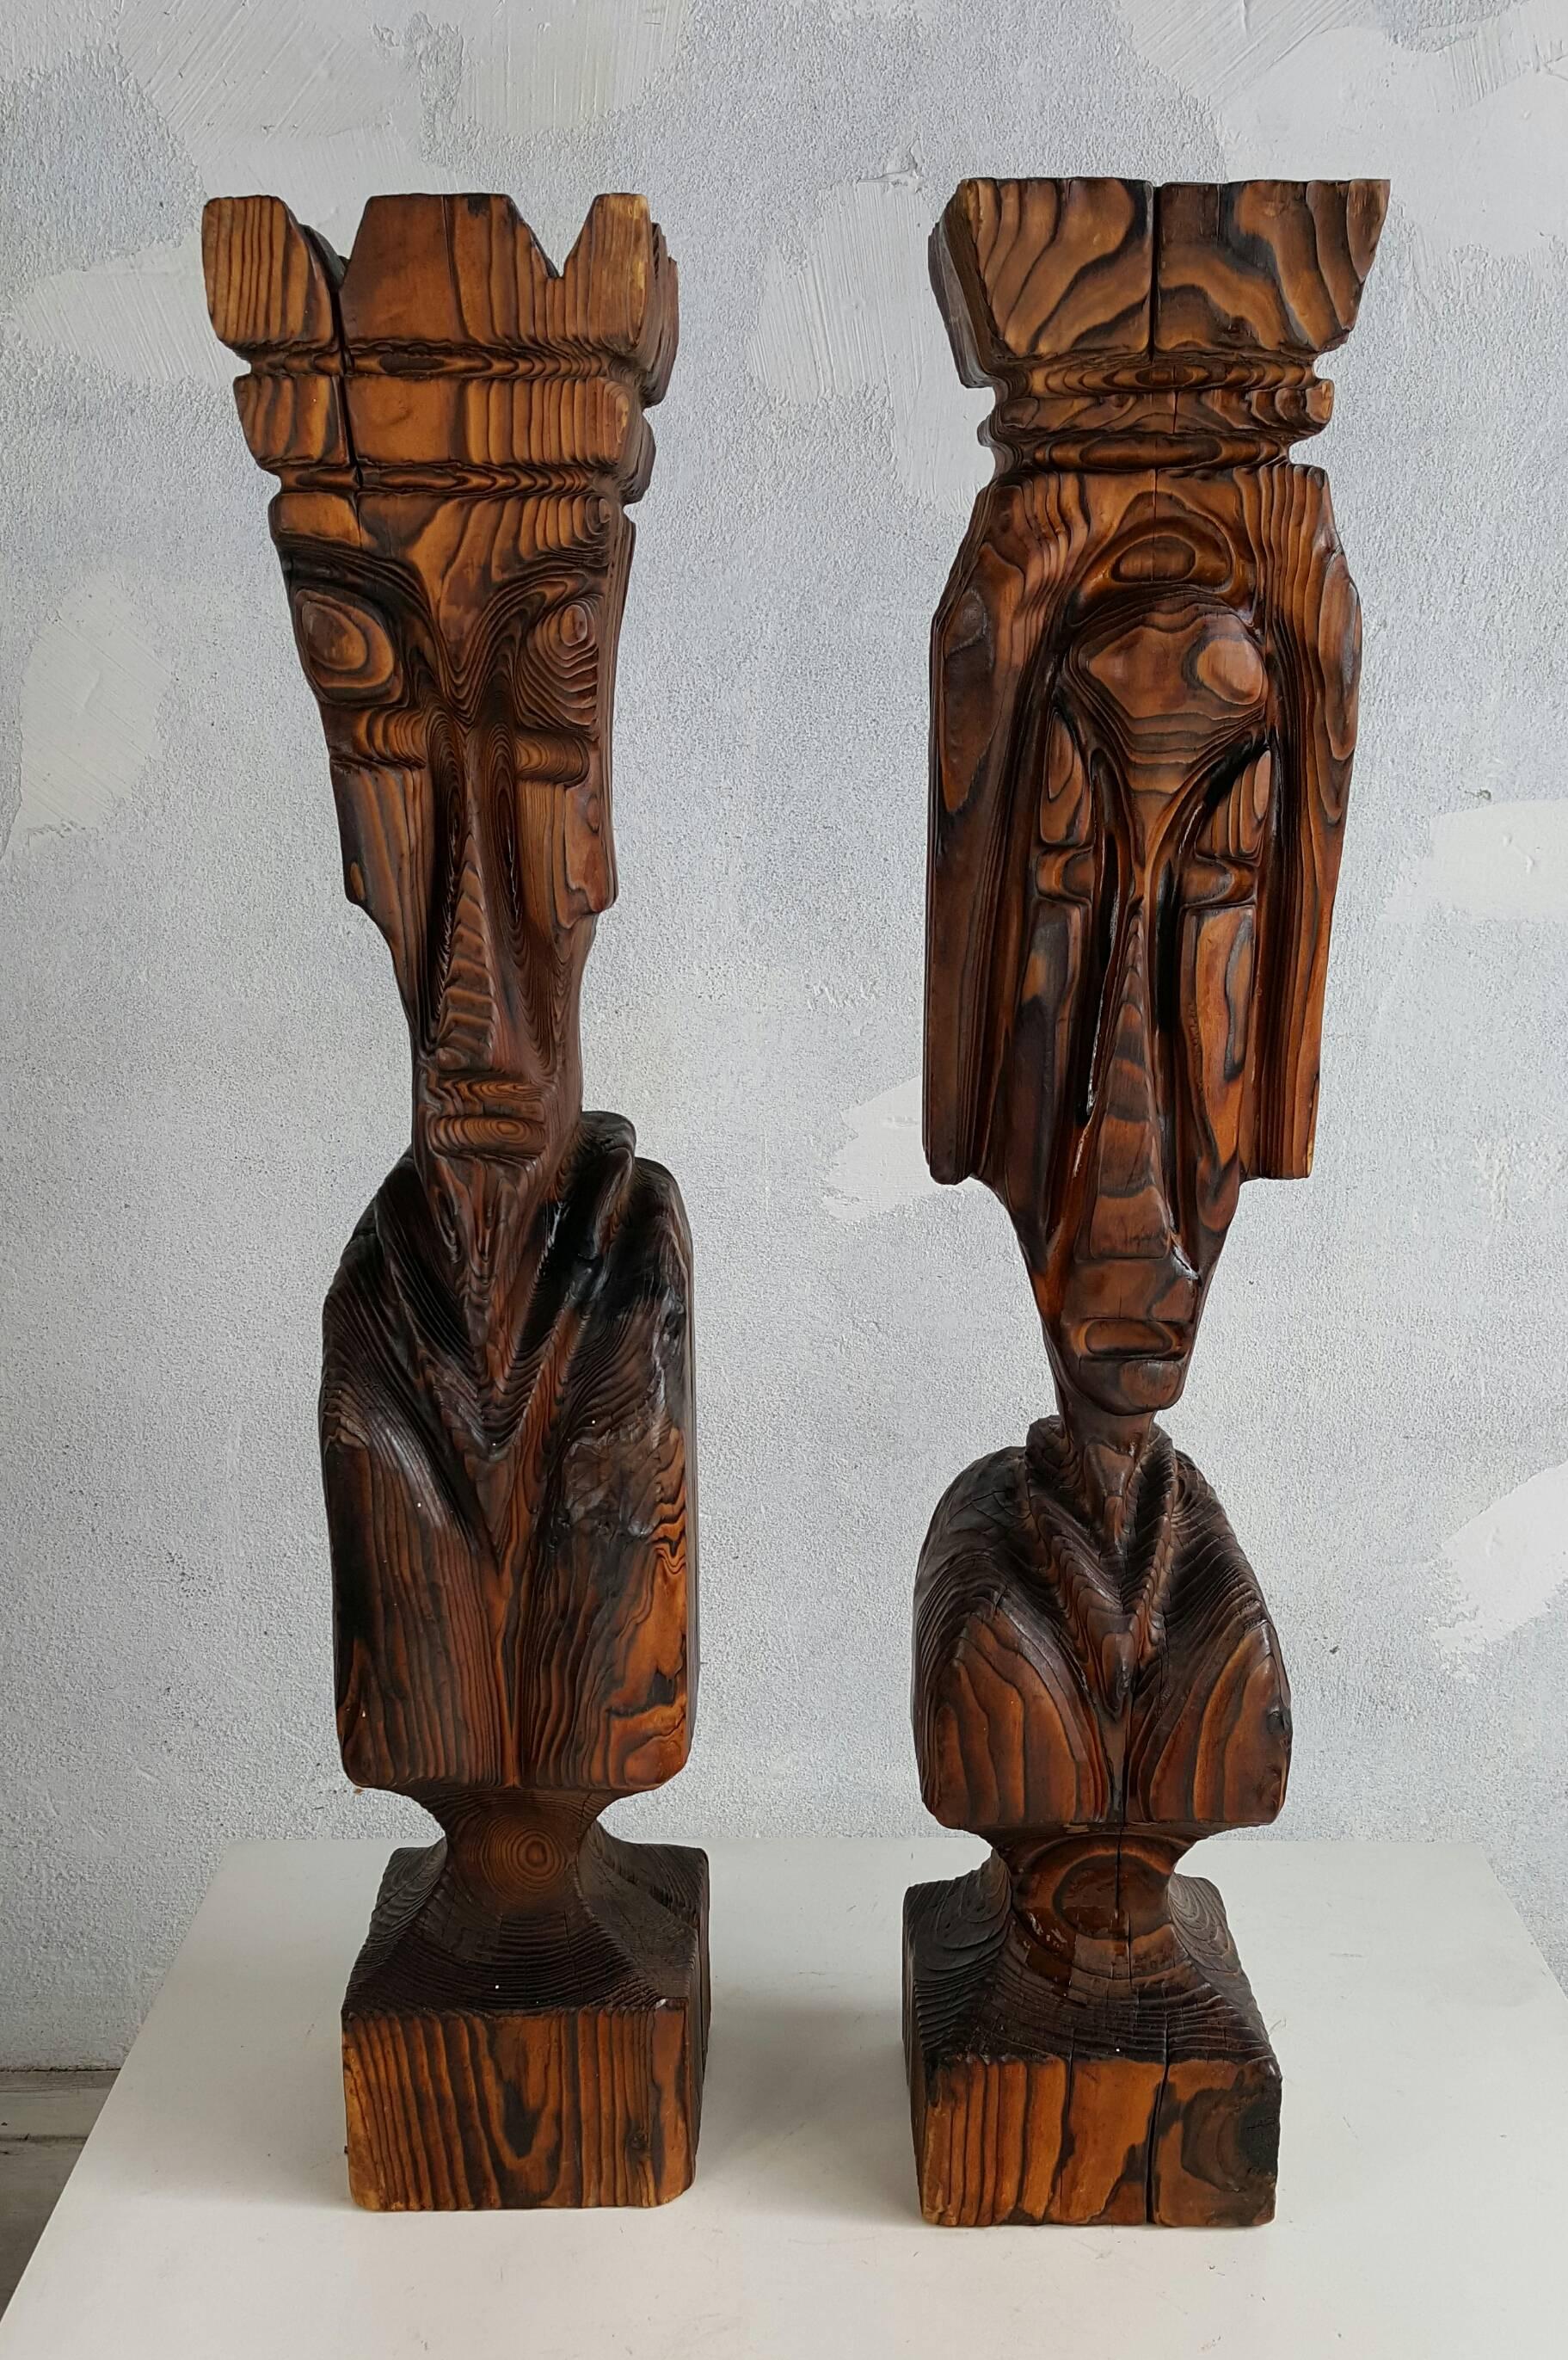 Witco started out as Western International Trading Company and imported South Pacific home furnishing items like Capishell lamps. They also were into carvings that eventually evolved into the rough cedar chain saw carved furniture and Tikis that